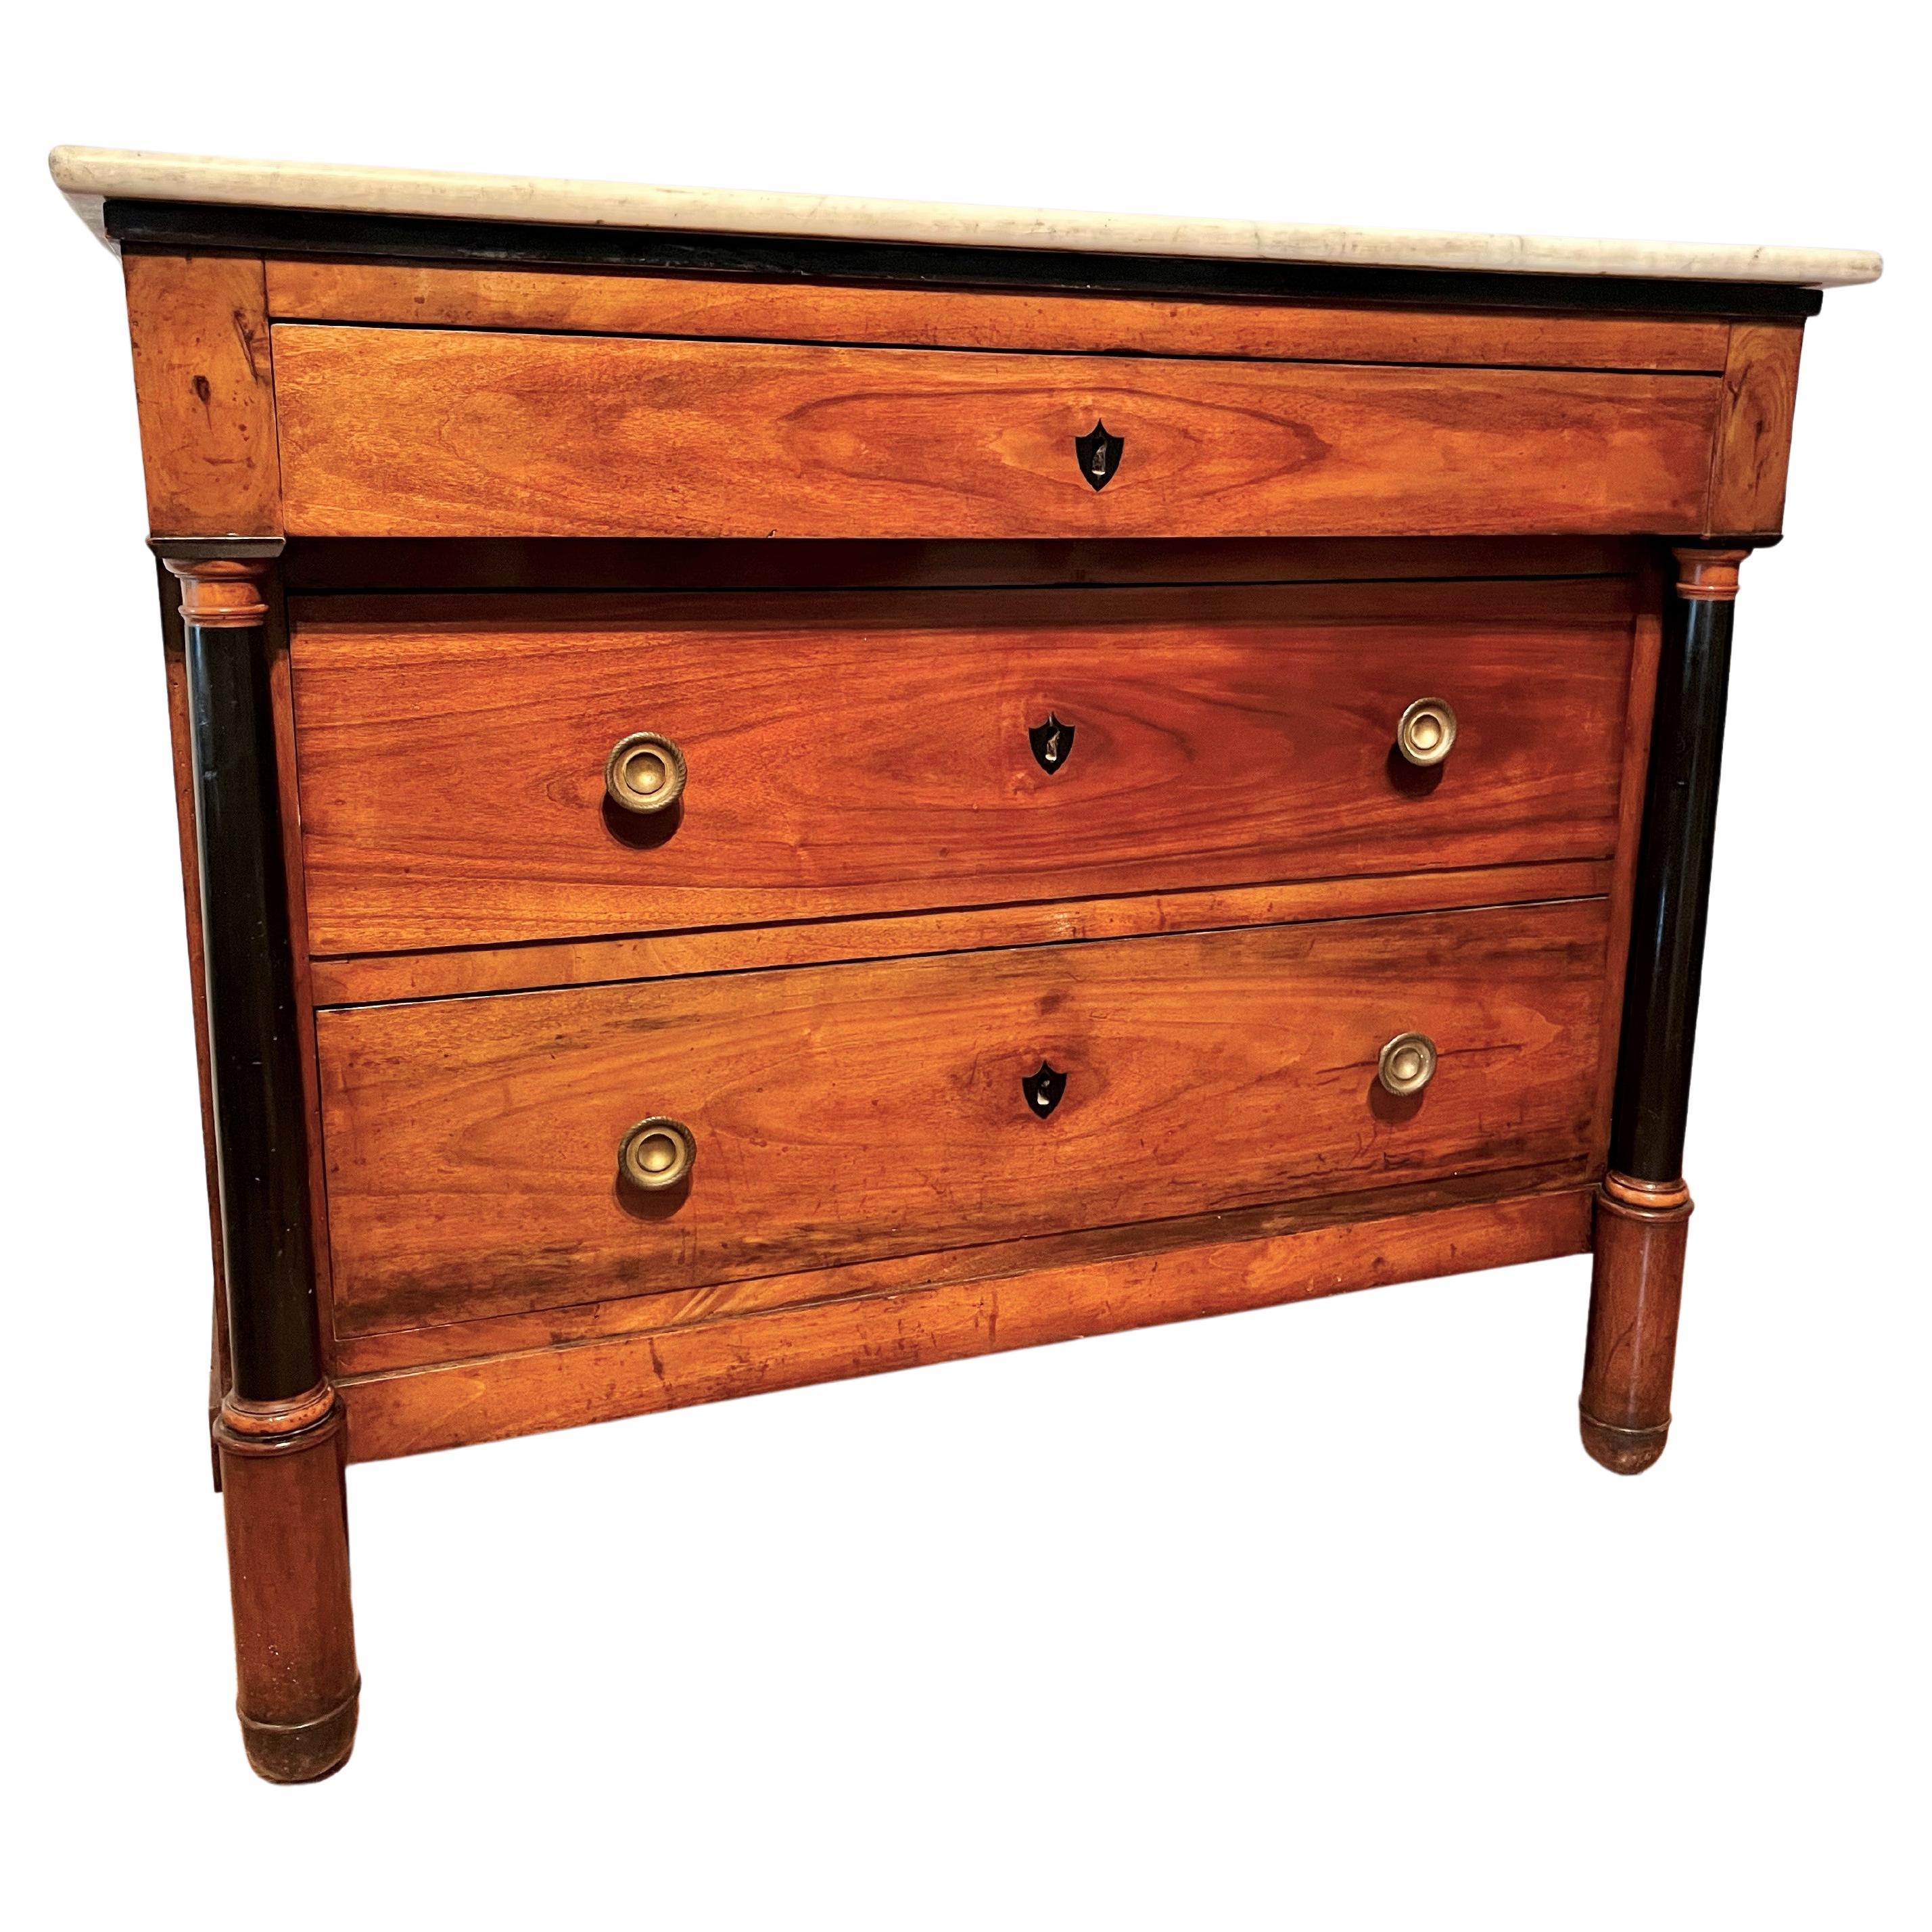 Italian Empire Style Chest of Cherrywood or Fruitwood with Ebonized Columns